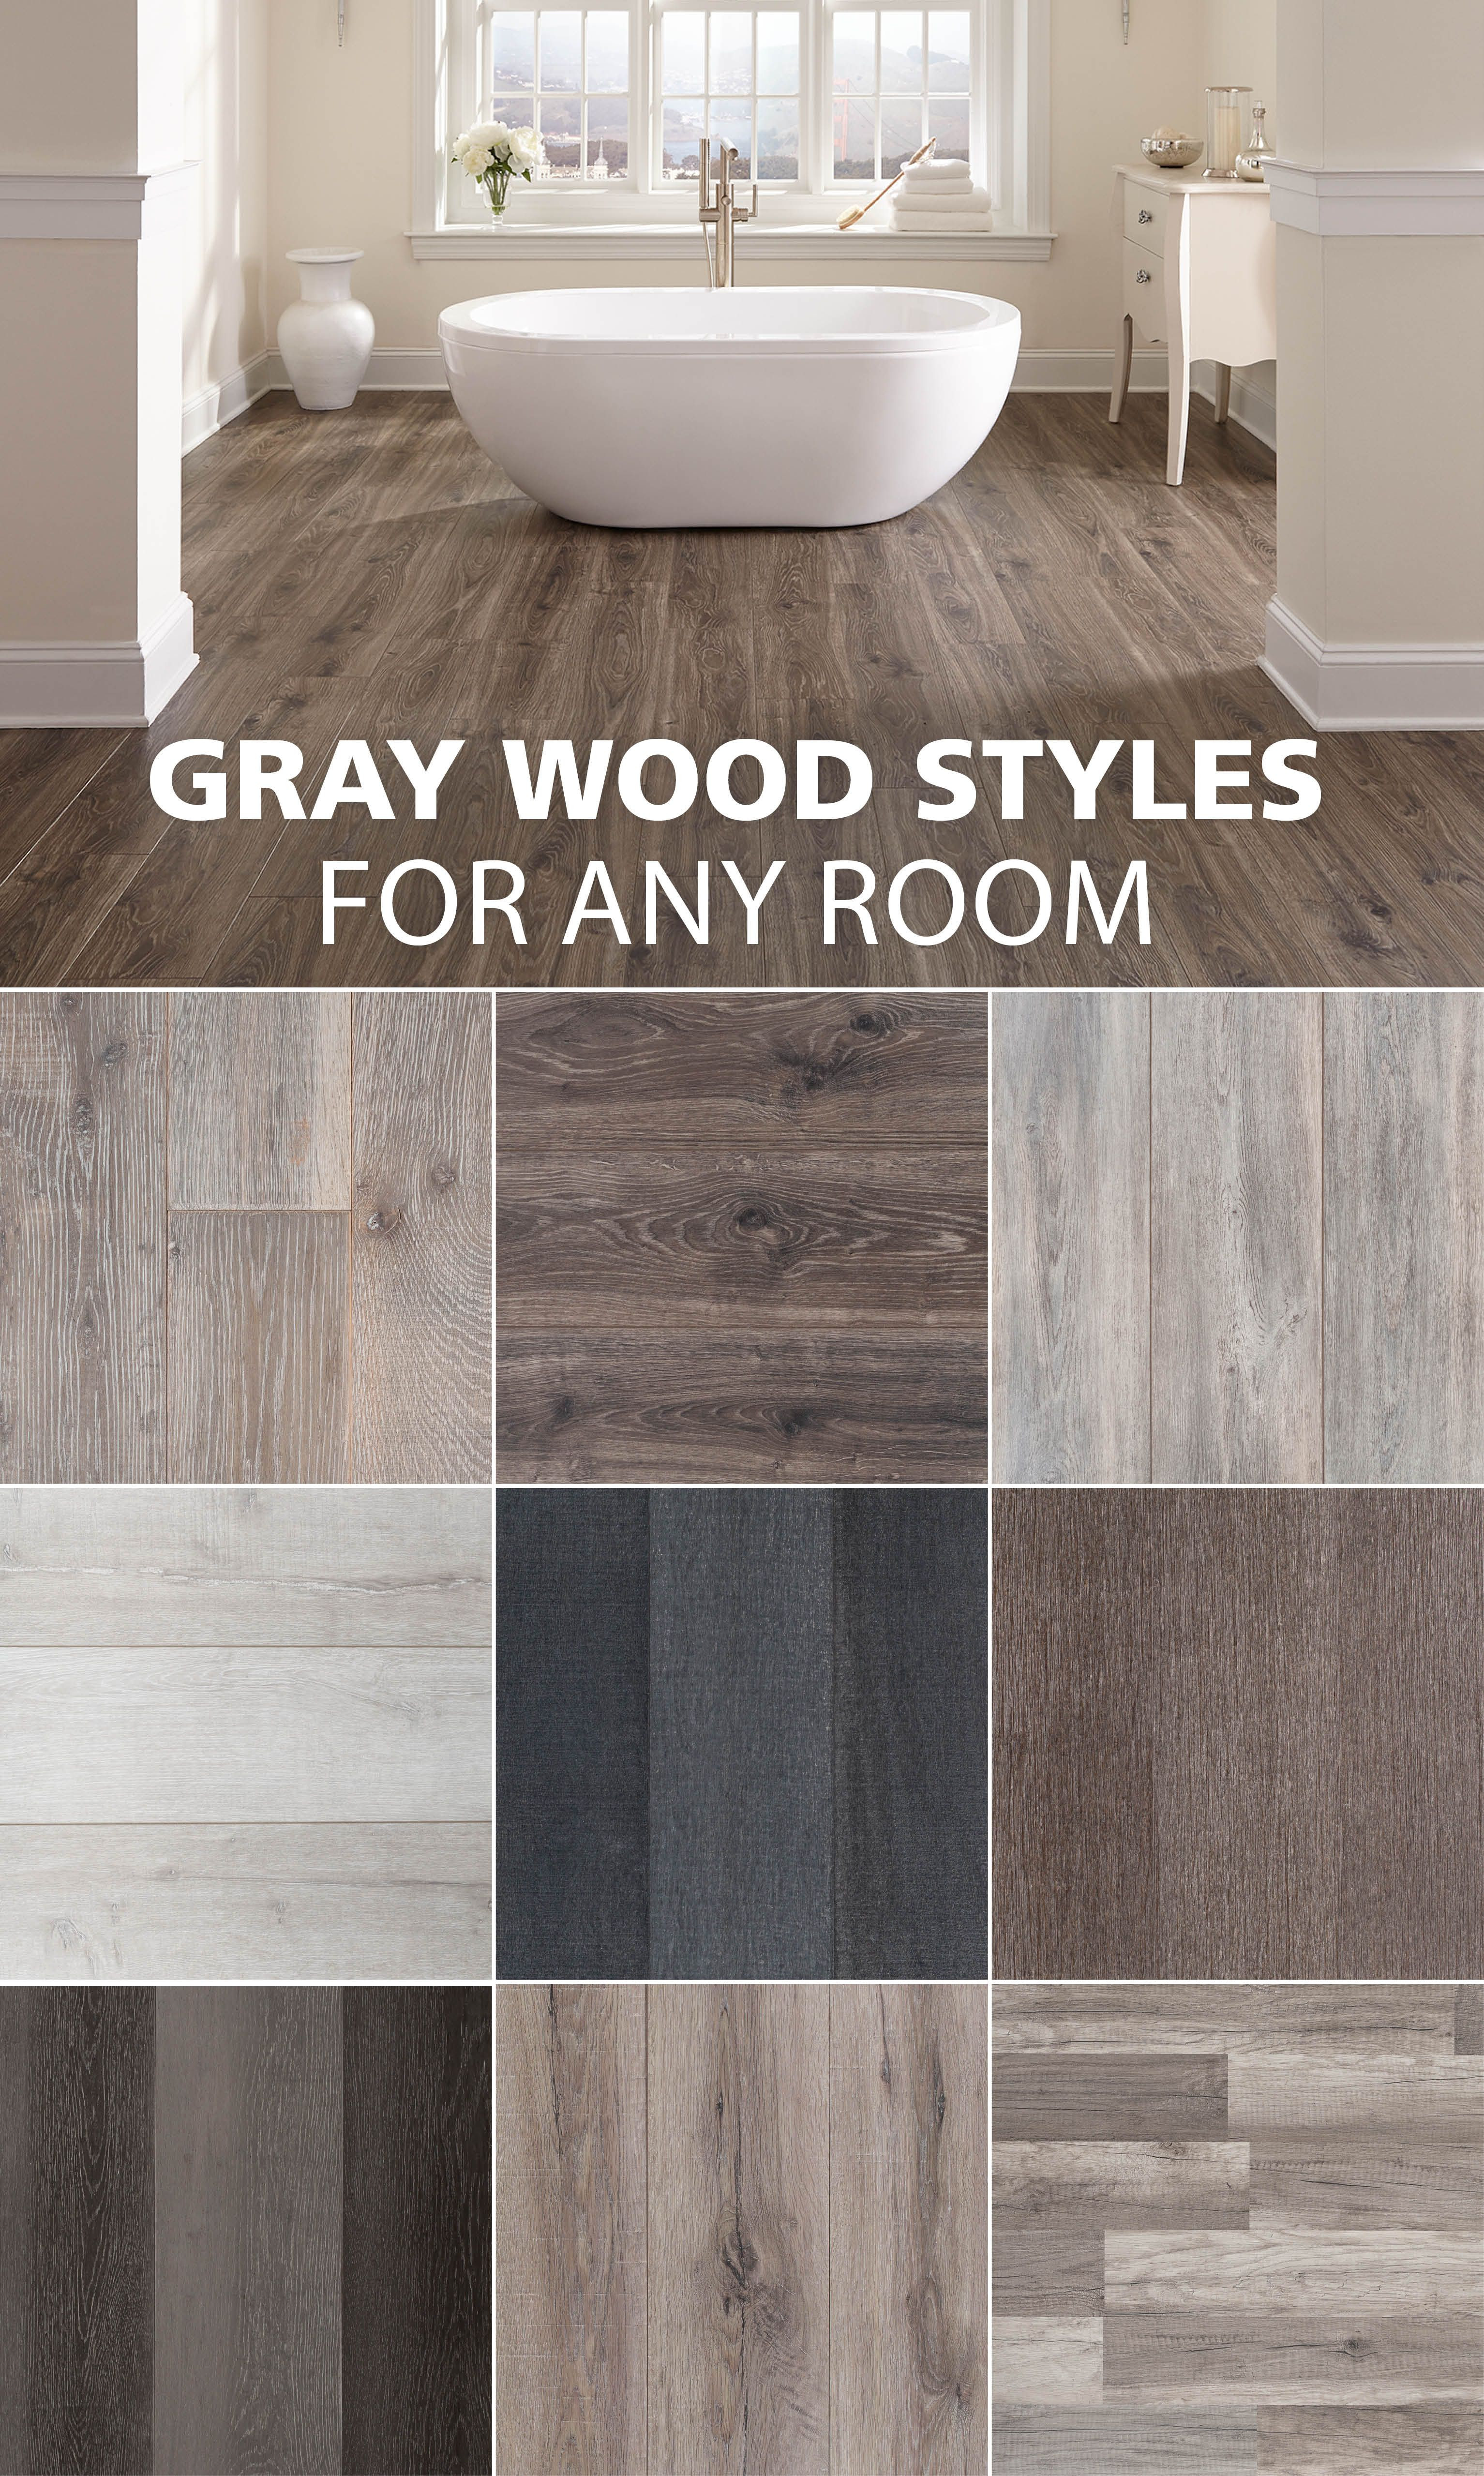 30 Lovely Refinishing Hardwood Floors Vs Replacing Cost 2024 free download refinishing hardwood floors vs replacing cost of here are some of our favorite gray wood look styles home decor intended for here are some of our favorite gray wood look styles